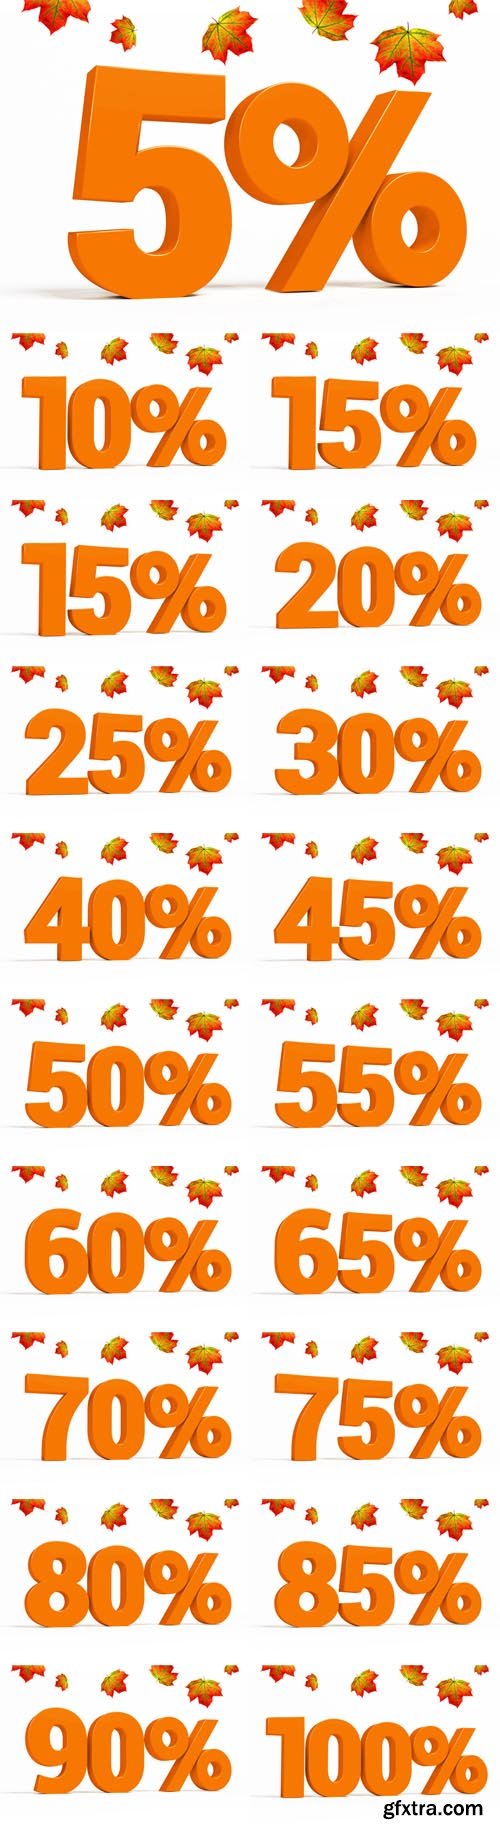 Photo Set - Orange 3D Percent Text on White Background with Leaves for Autumn Sale Campaigns